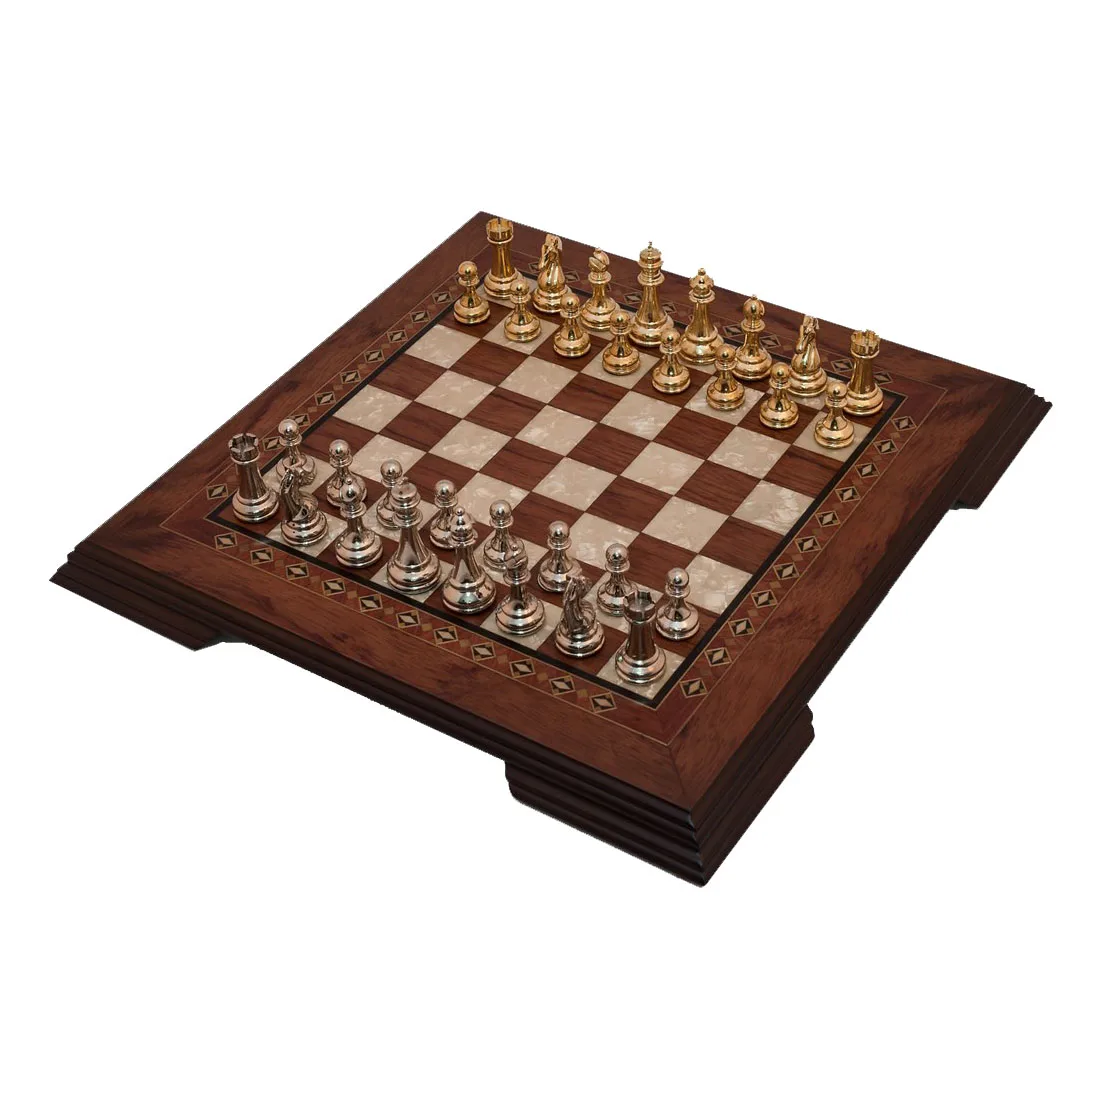 Solid Walnut Wood Chess Game Set - With Metal Figure - Footed Mosaic Engraved Chessboard Gift Items Шахматы шахматы оценка позиции и план карпов а